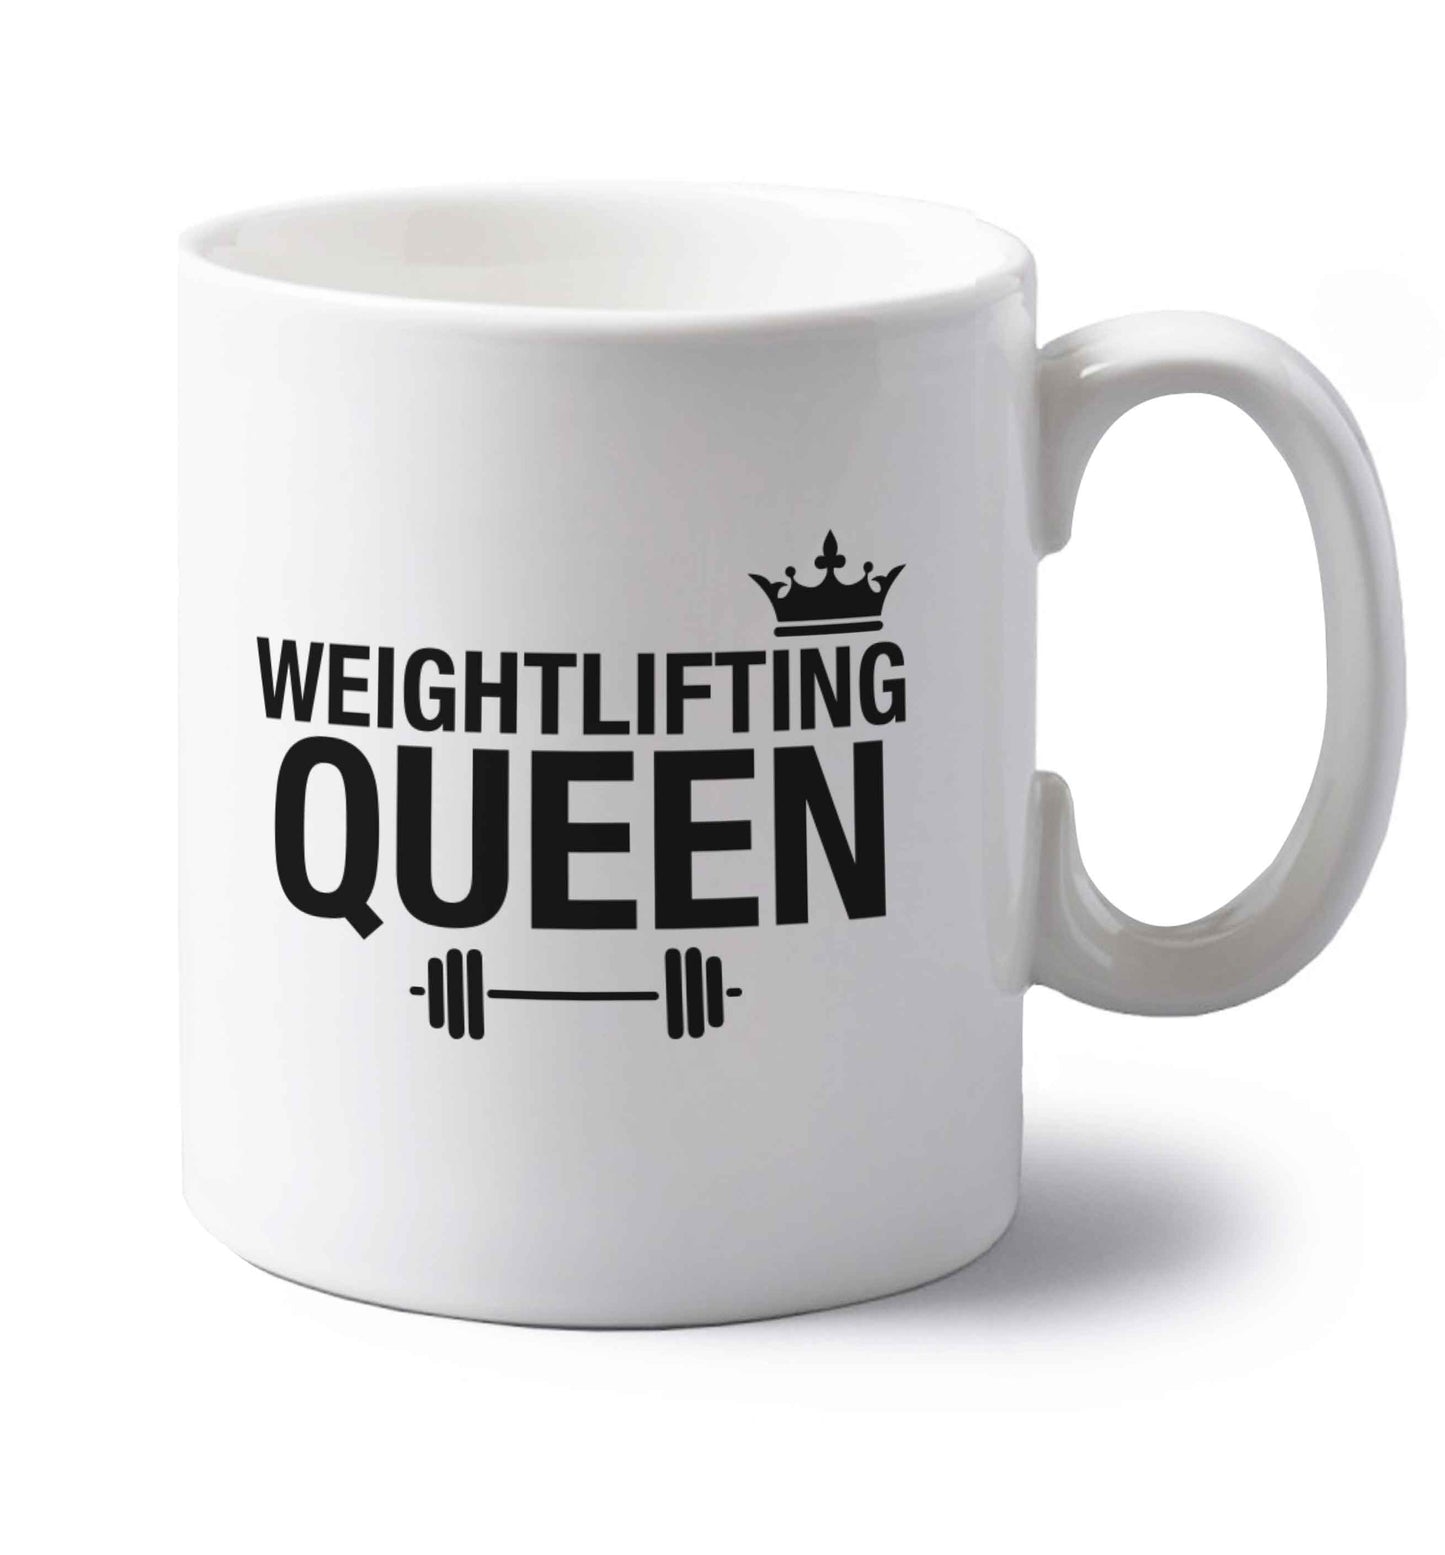 Weightlifting Queen left handed white ceramic mug 